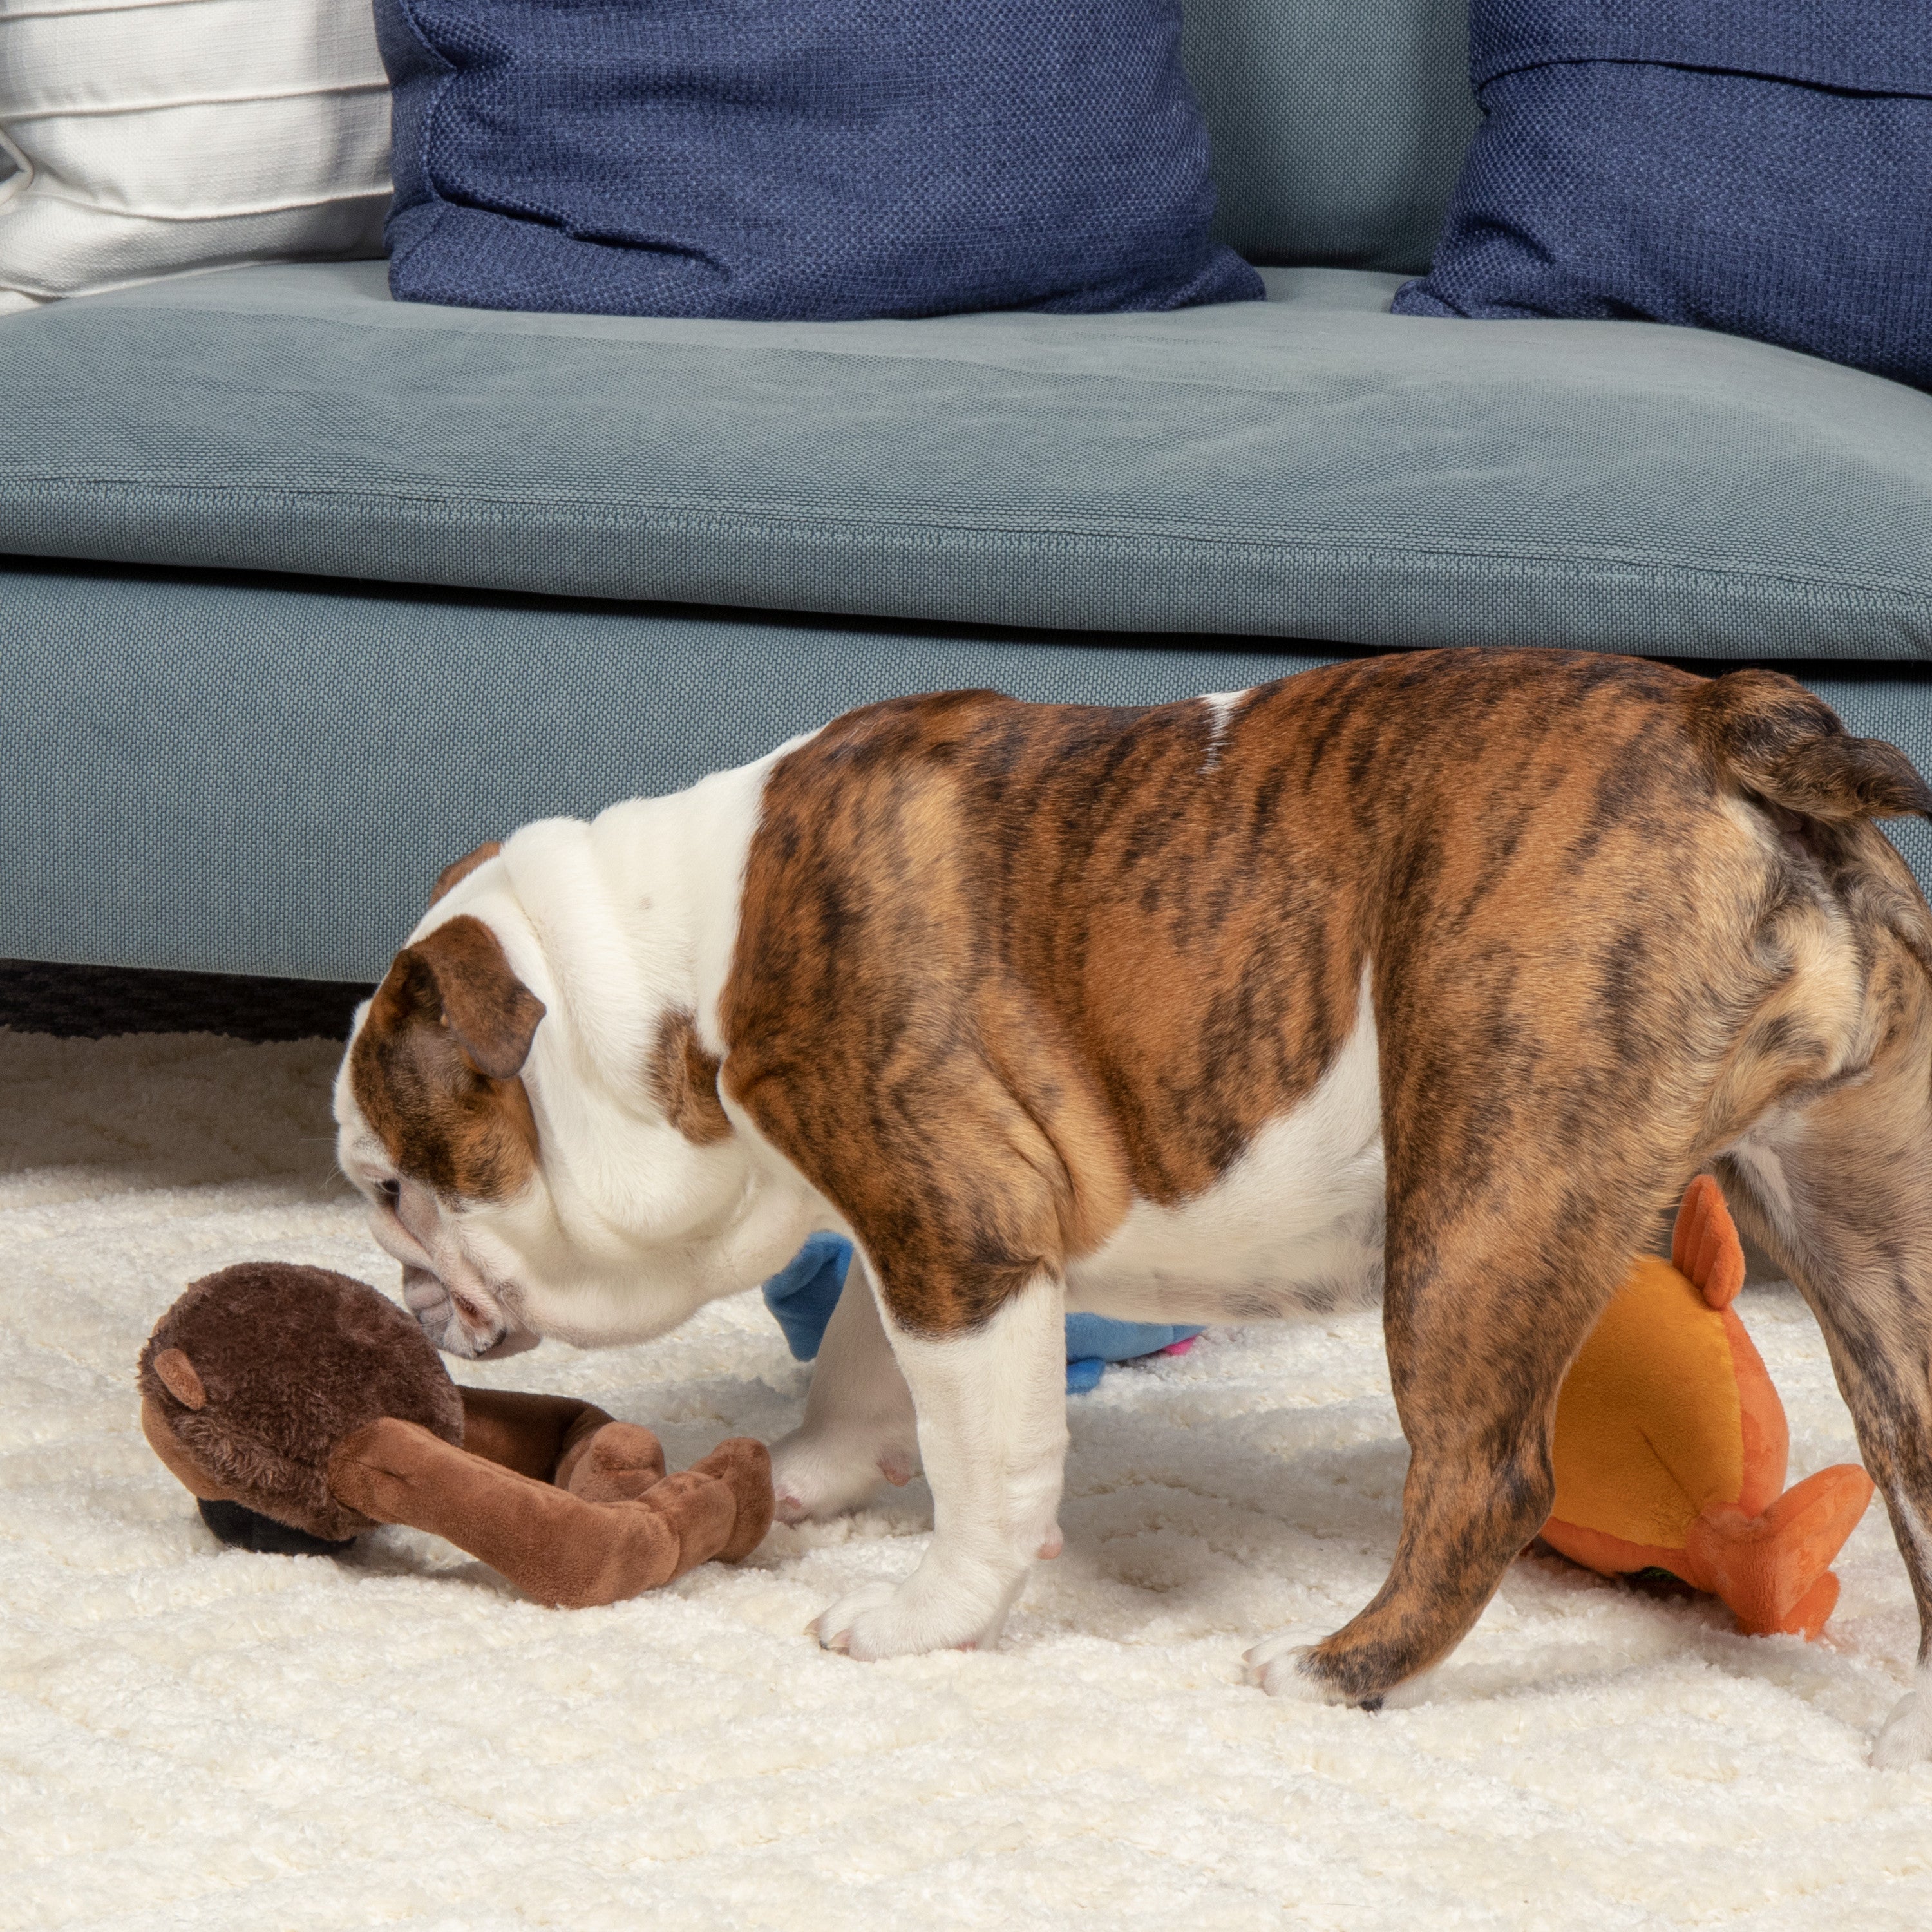 A Bulldog sniffs a goDog Action Plush Ape, a brown plush dog toy with long arms featuring Bite Activated motion